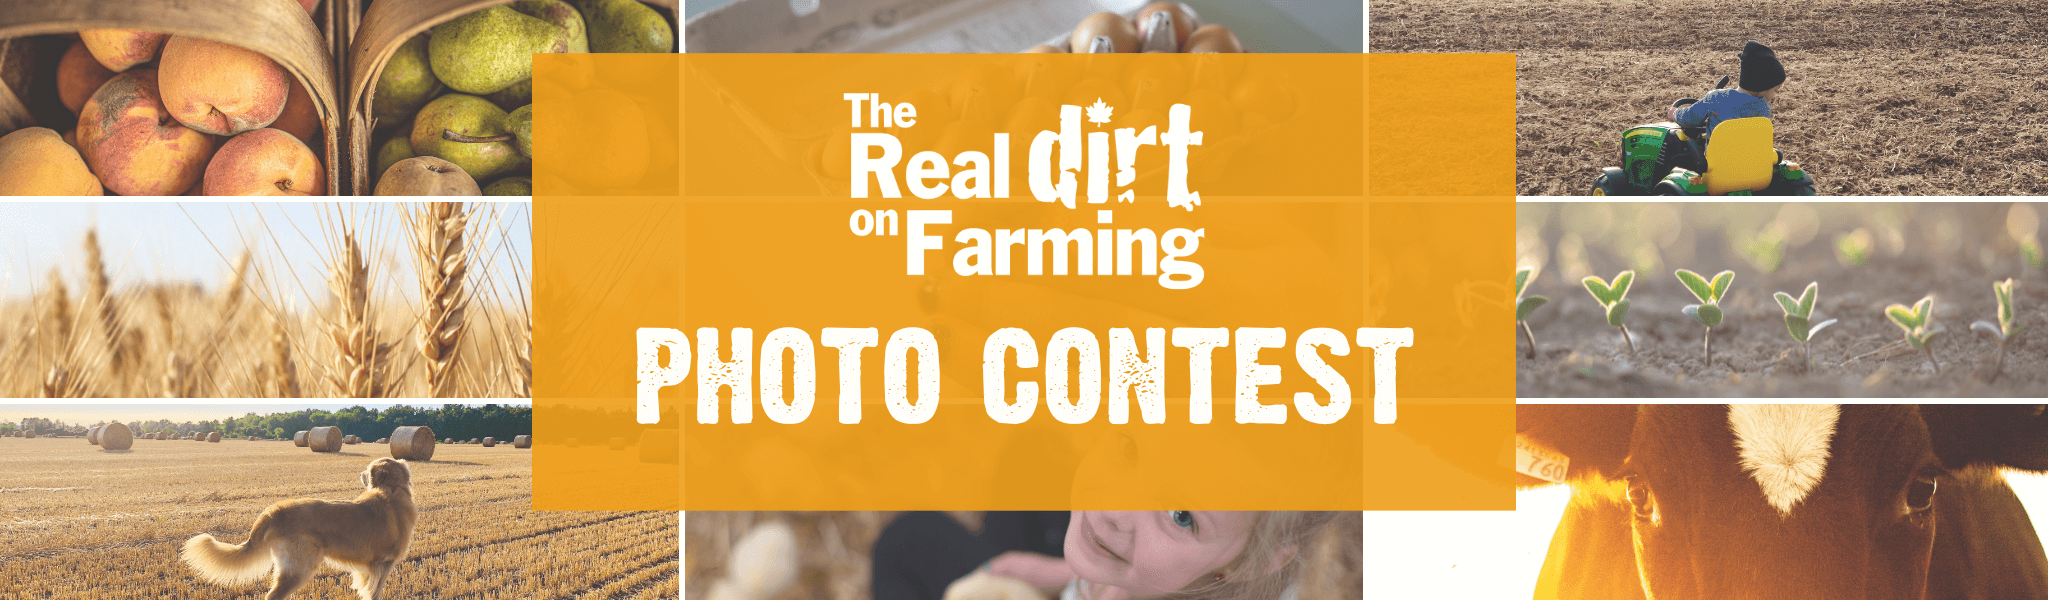 Real Dirt photo contest